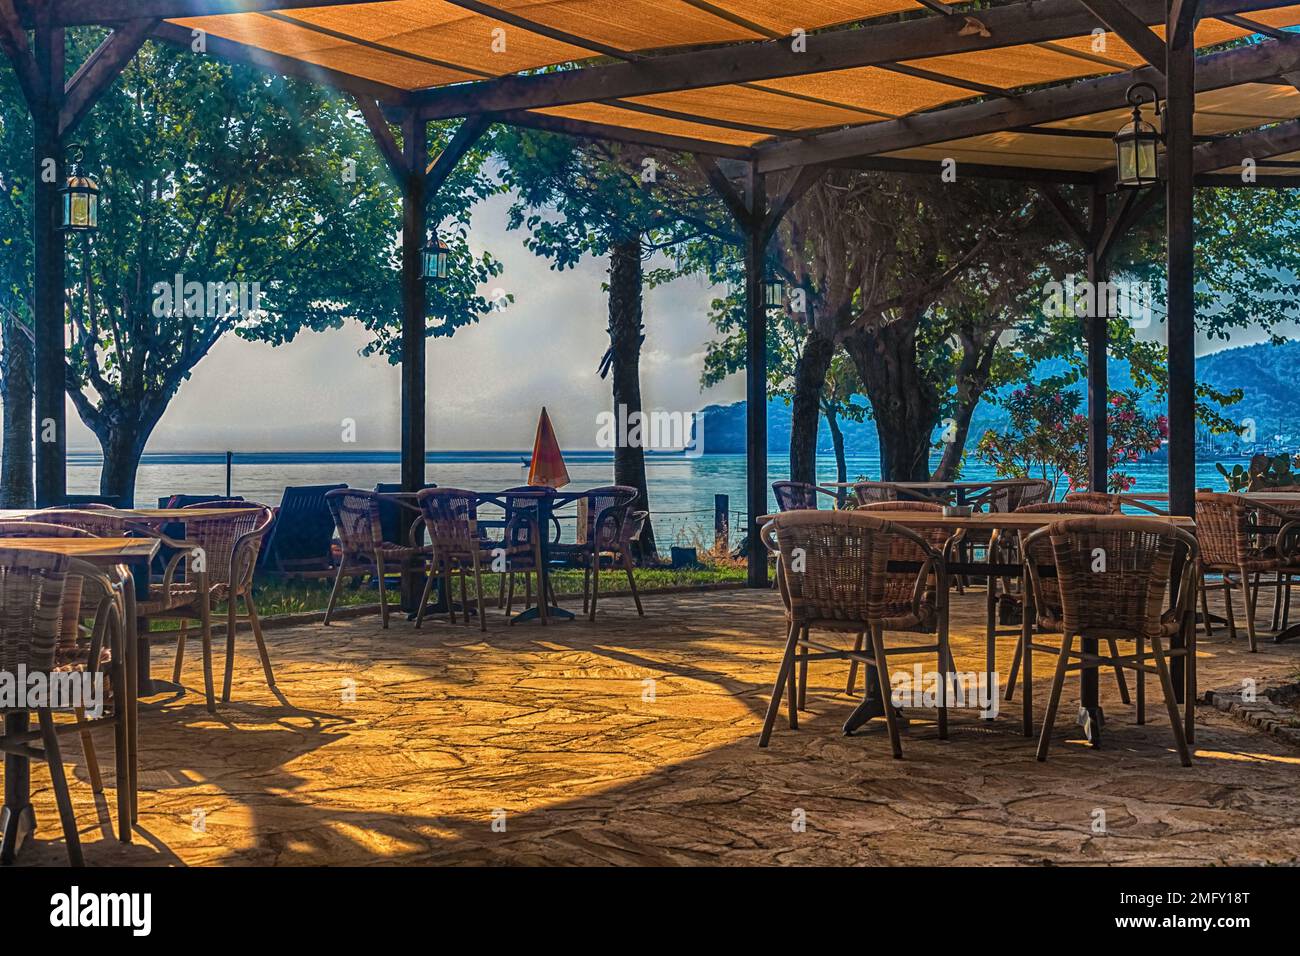 View of the cafe on the beach overlooking the sea. Kemer, Turkey Stock Photo